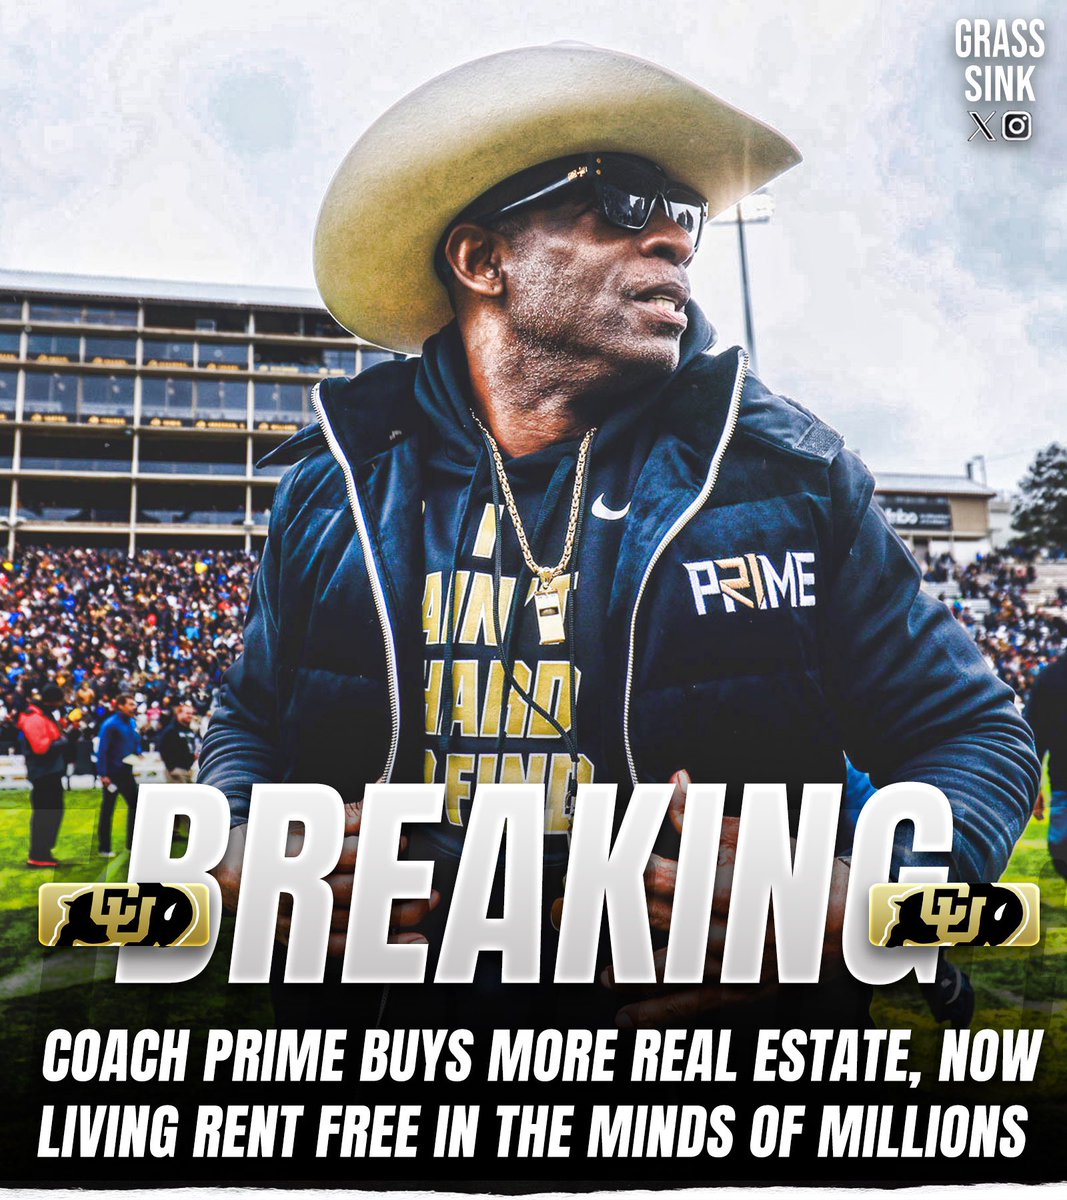 BREAKING: Coach Prime has officially bought more property and is now living rent free in the minds of tens of millions of Americans. You can now add real estate mogul to the very long list of accomplishments Coach Prime has achieved in his life. Congrats Prime!